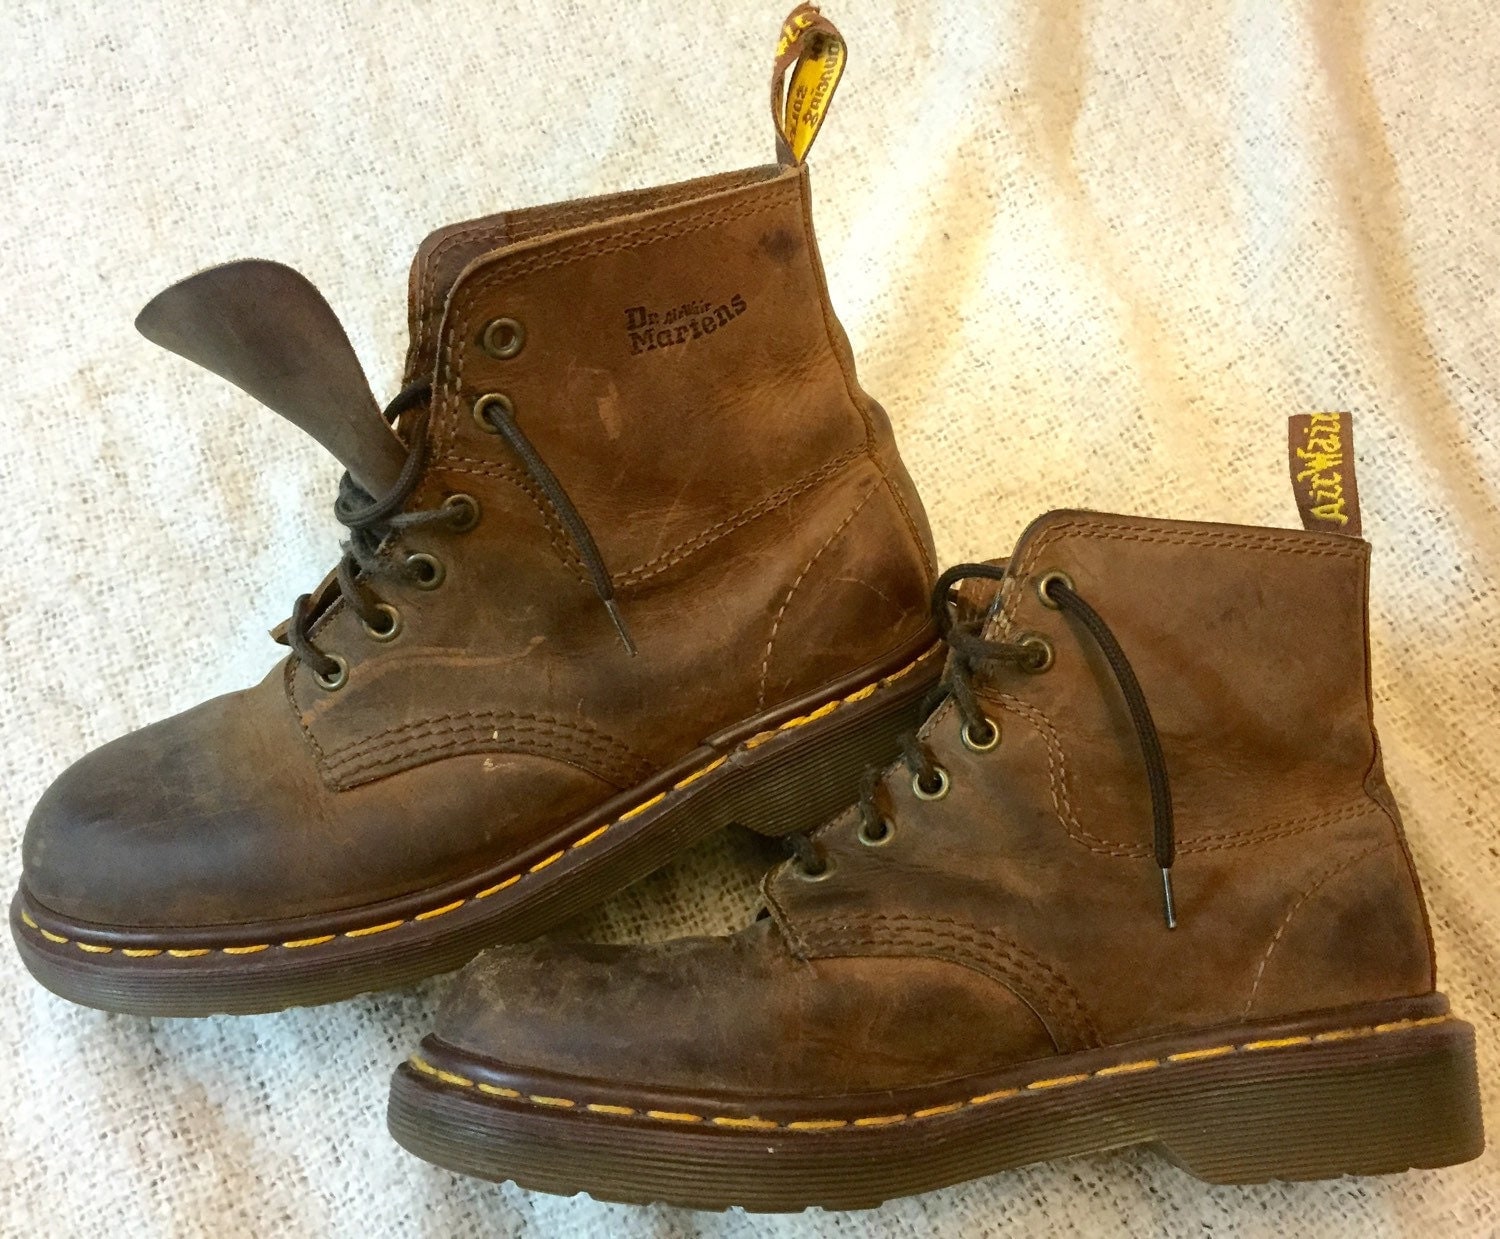 Vintage 90s Brown 6 Hole Dr. Martens Leather Boots Made in